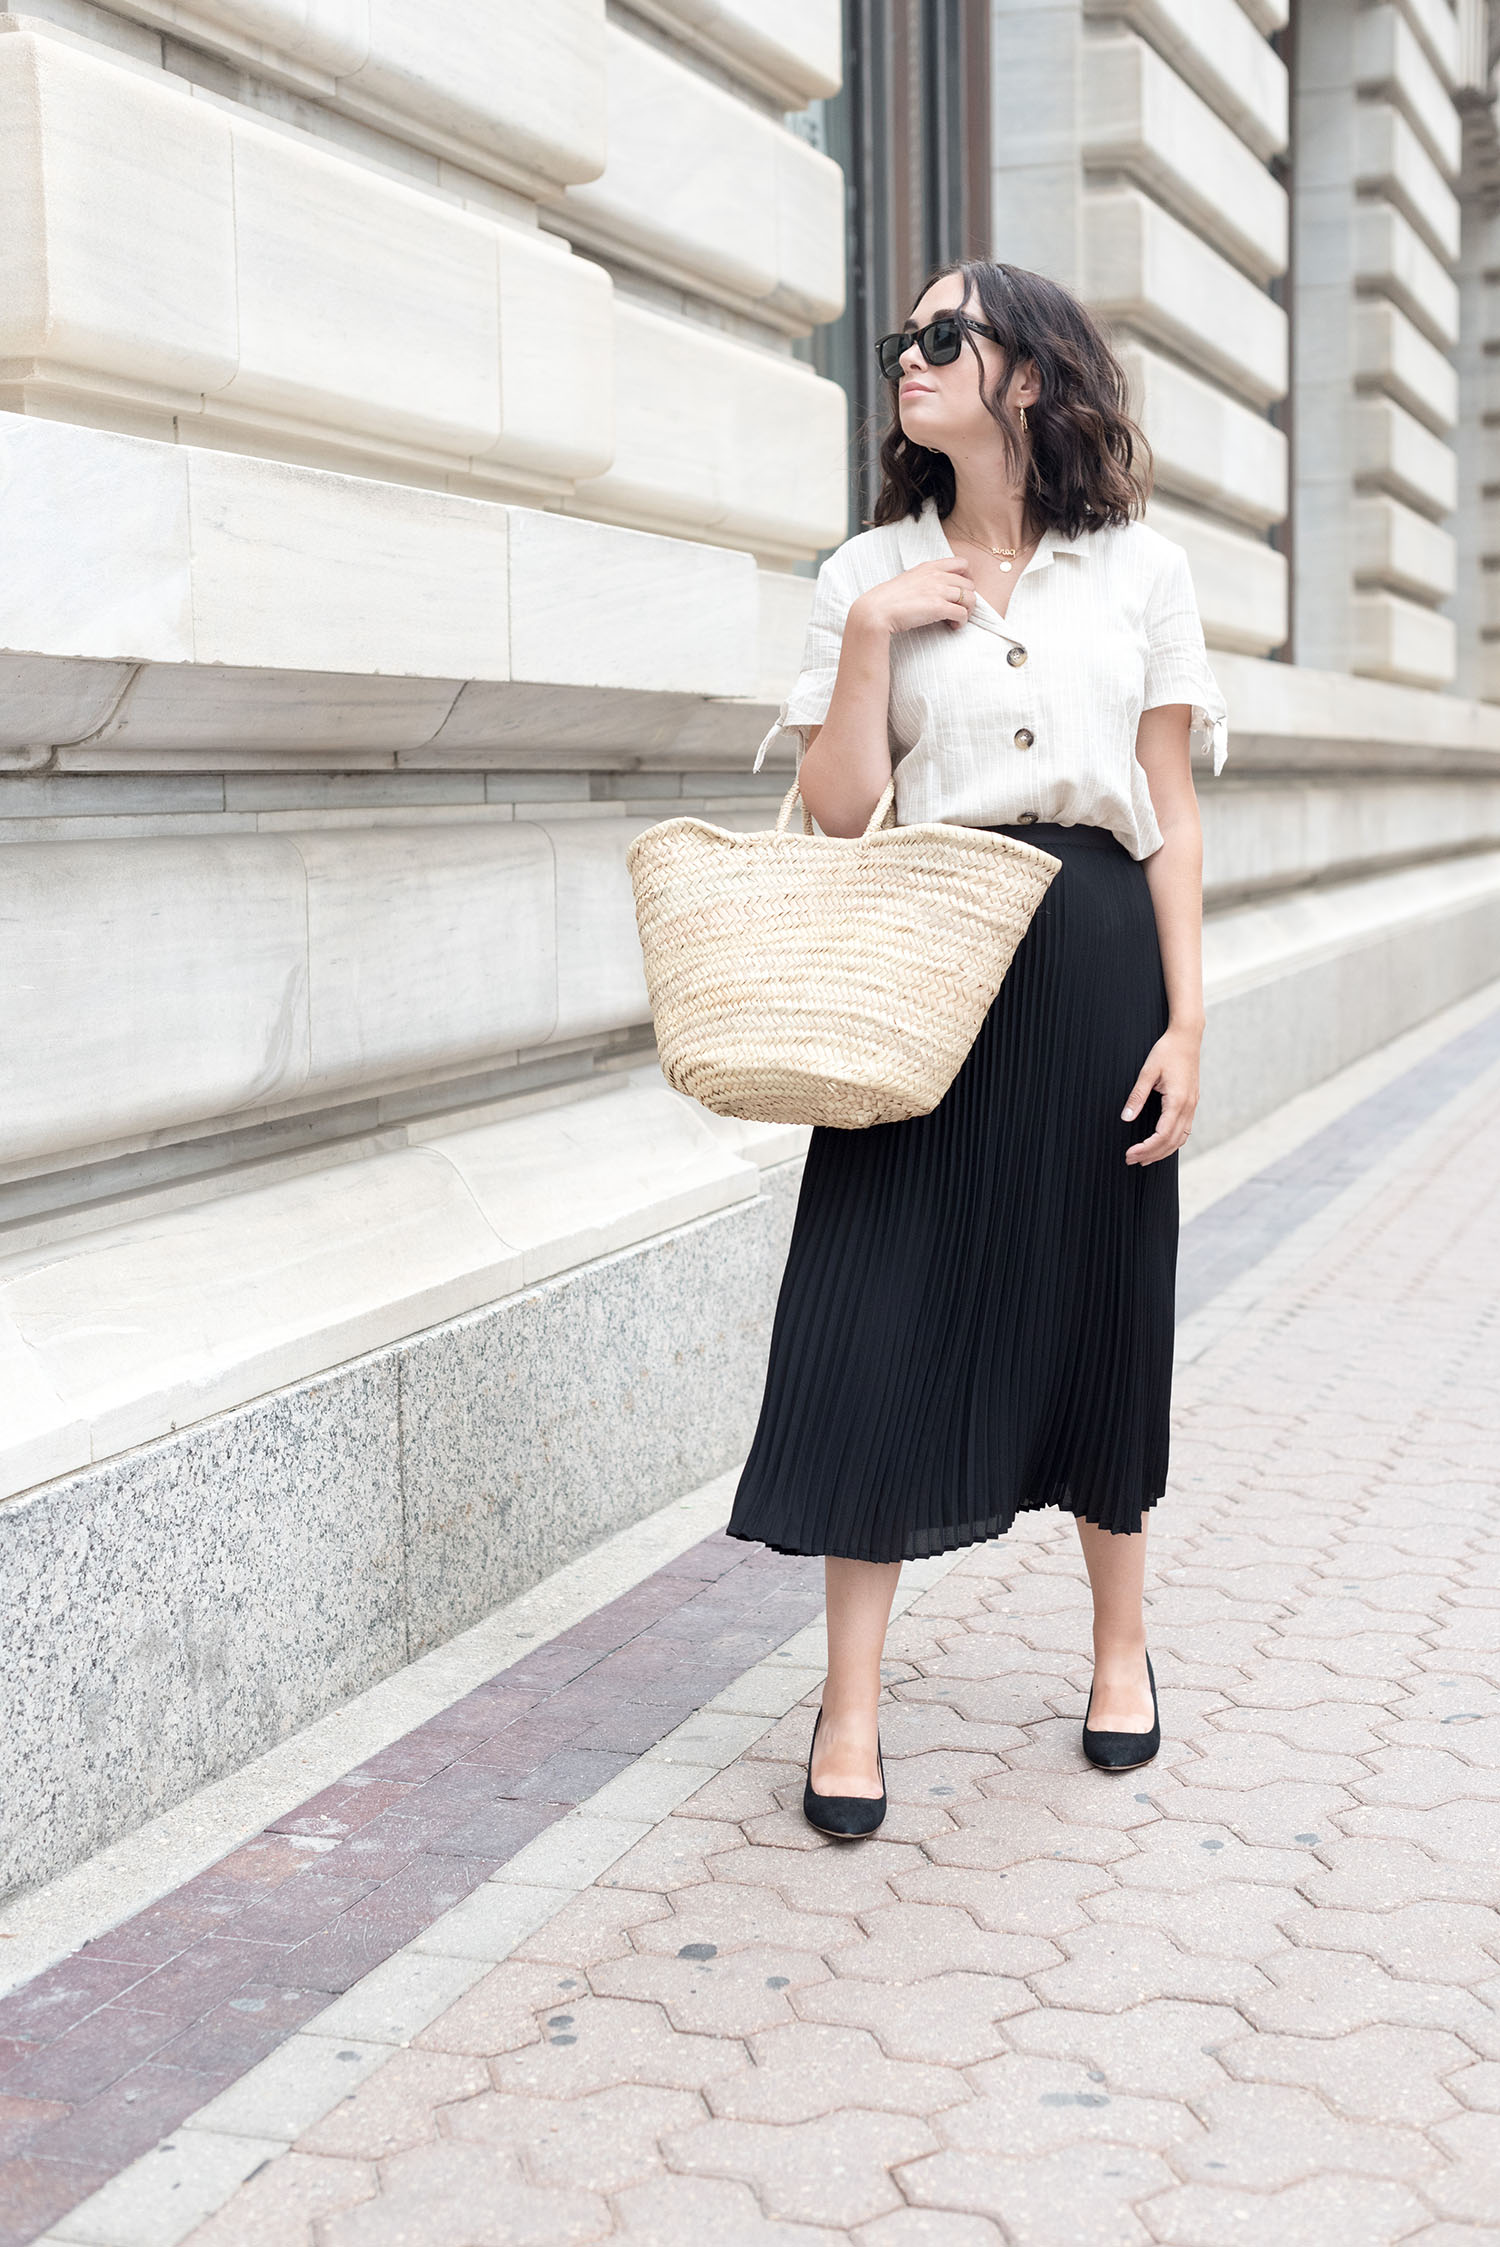 Top Winnipeg fashion blogger Cee Fardoe of Coco & Vera stands in the Exchange District wearing an Aritzia pleated skirt and carrying a Sezane straw tote bag